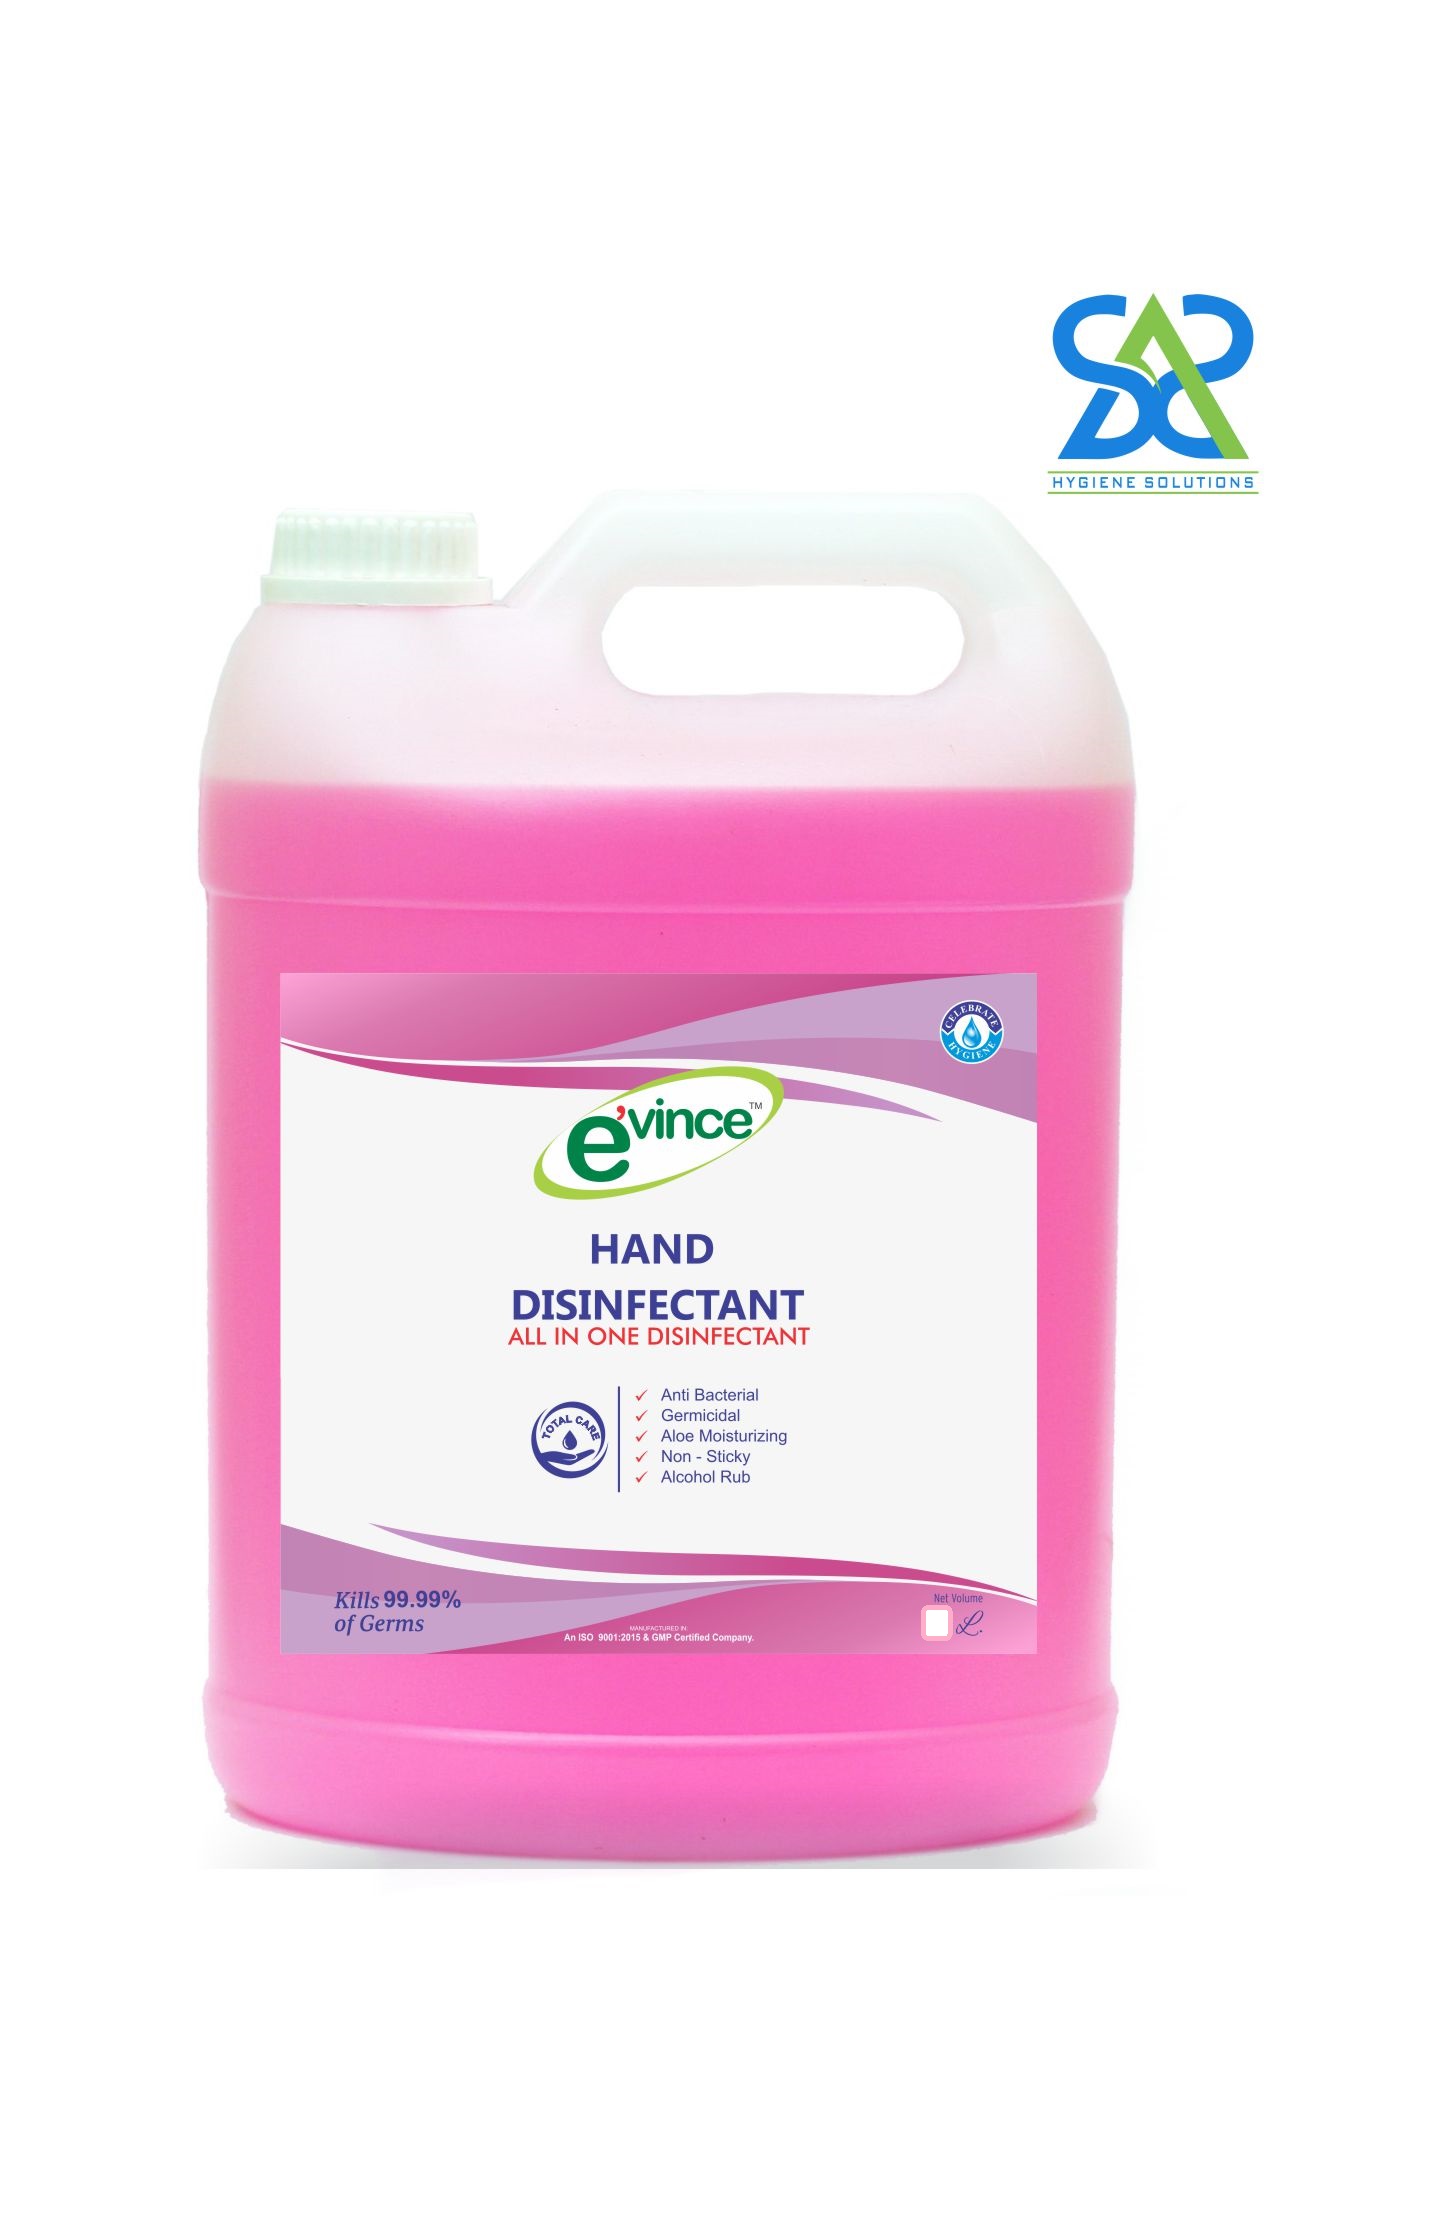 evince-hand-disinfectant-all-in-one-2-litres-510-00